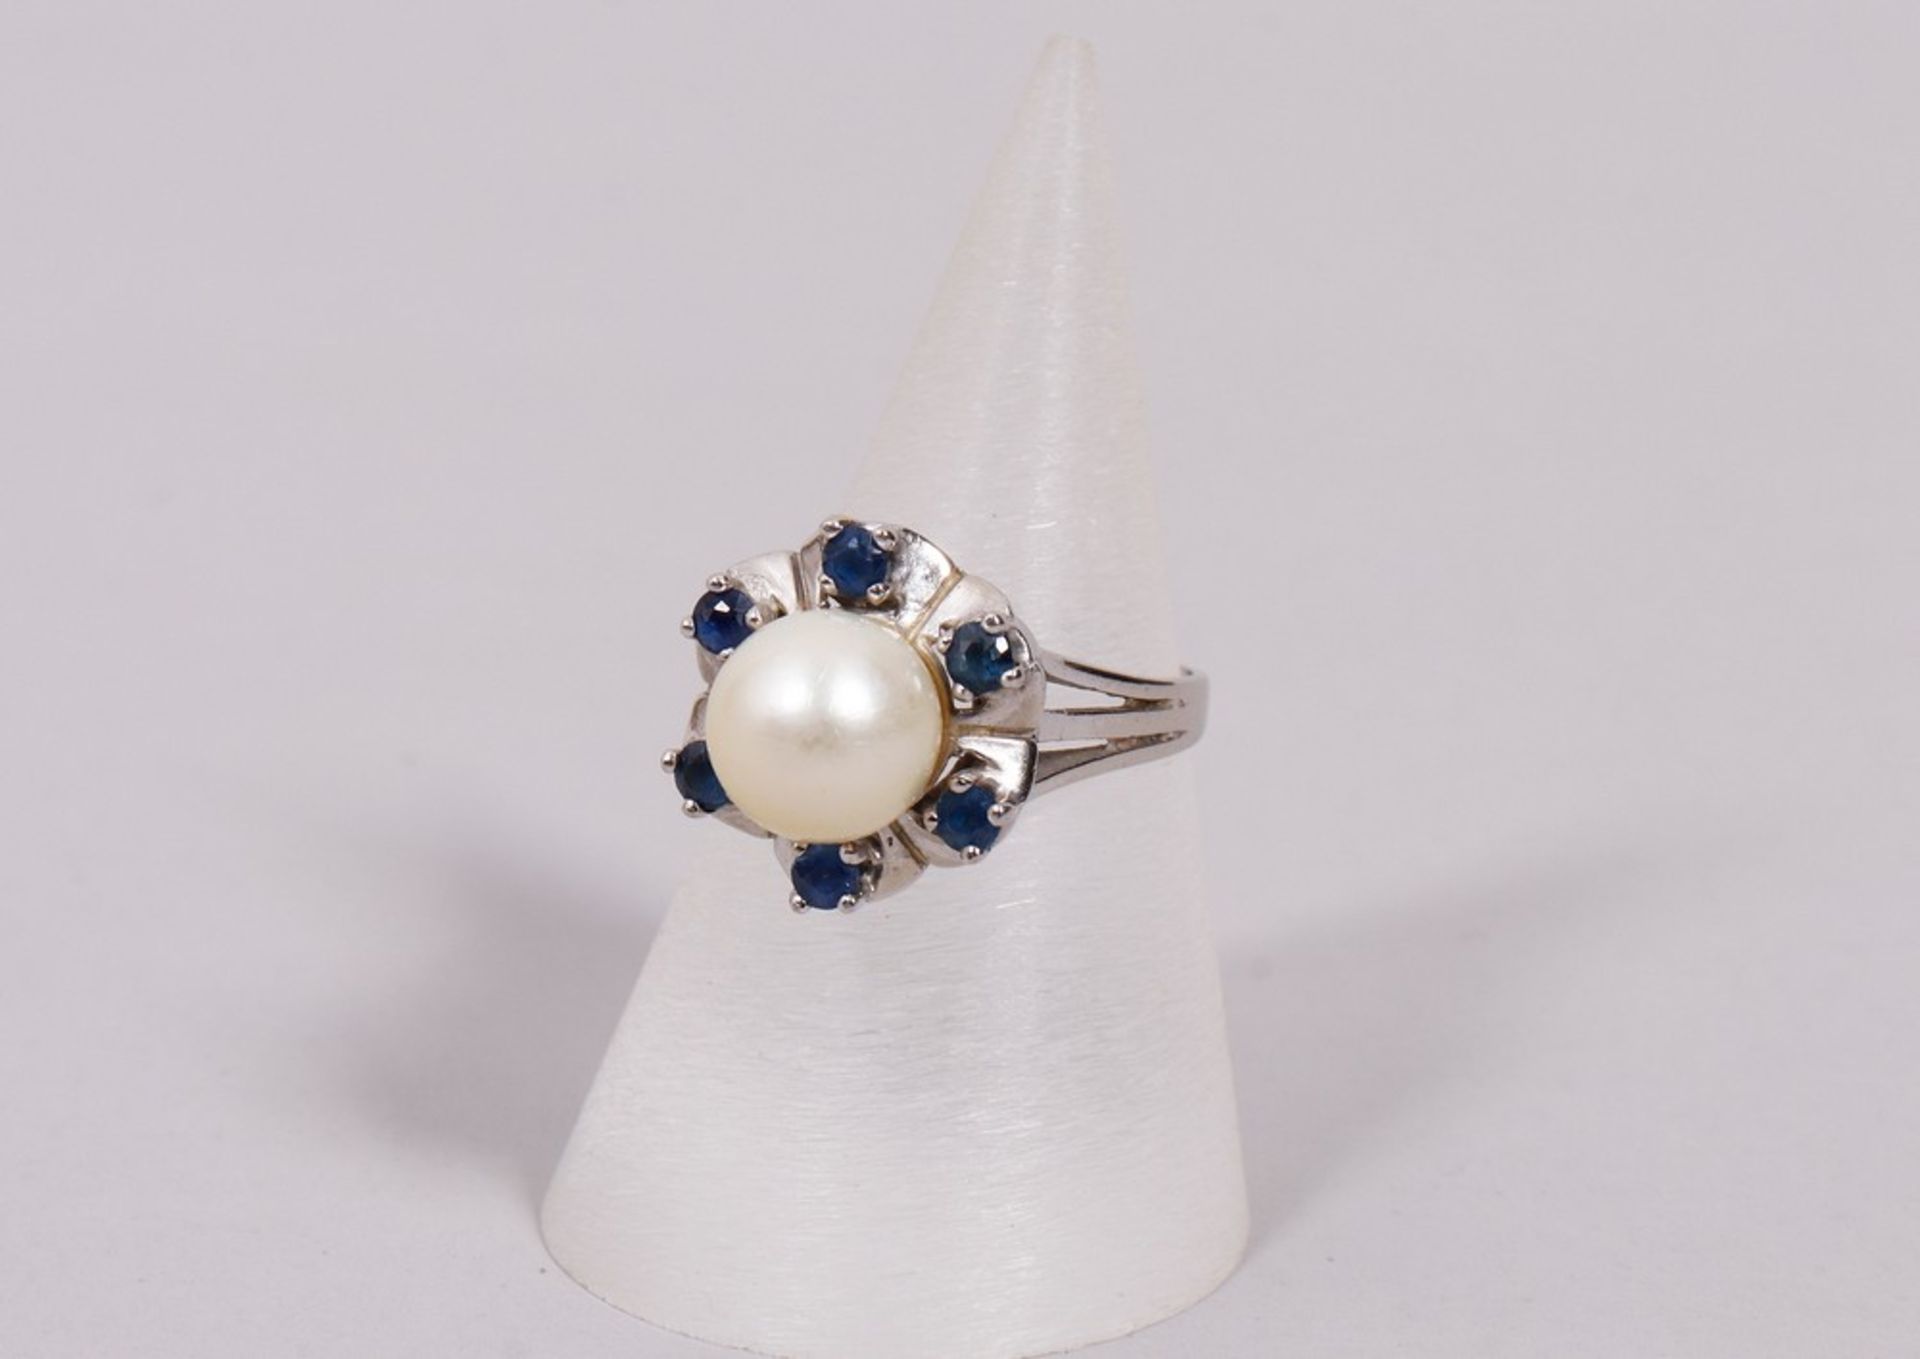 Pearl ring, 585 white gold, 20th C.